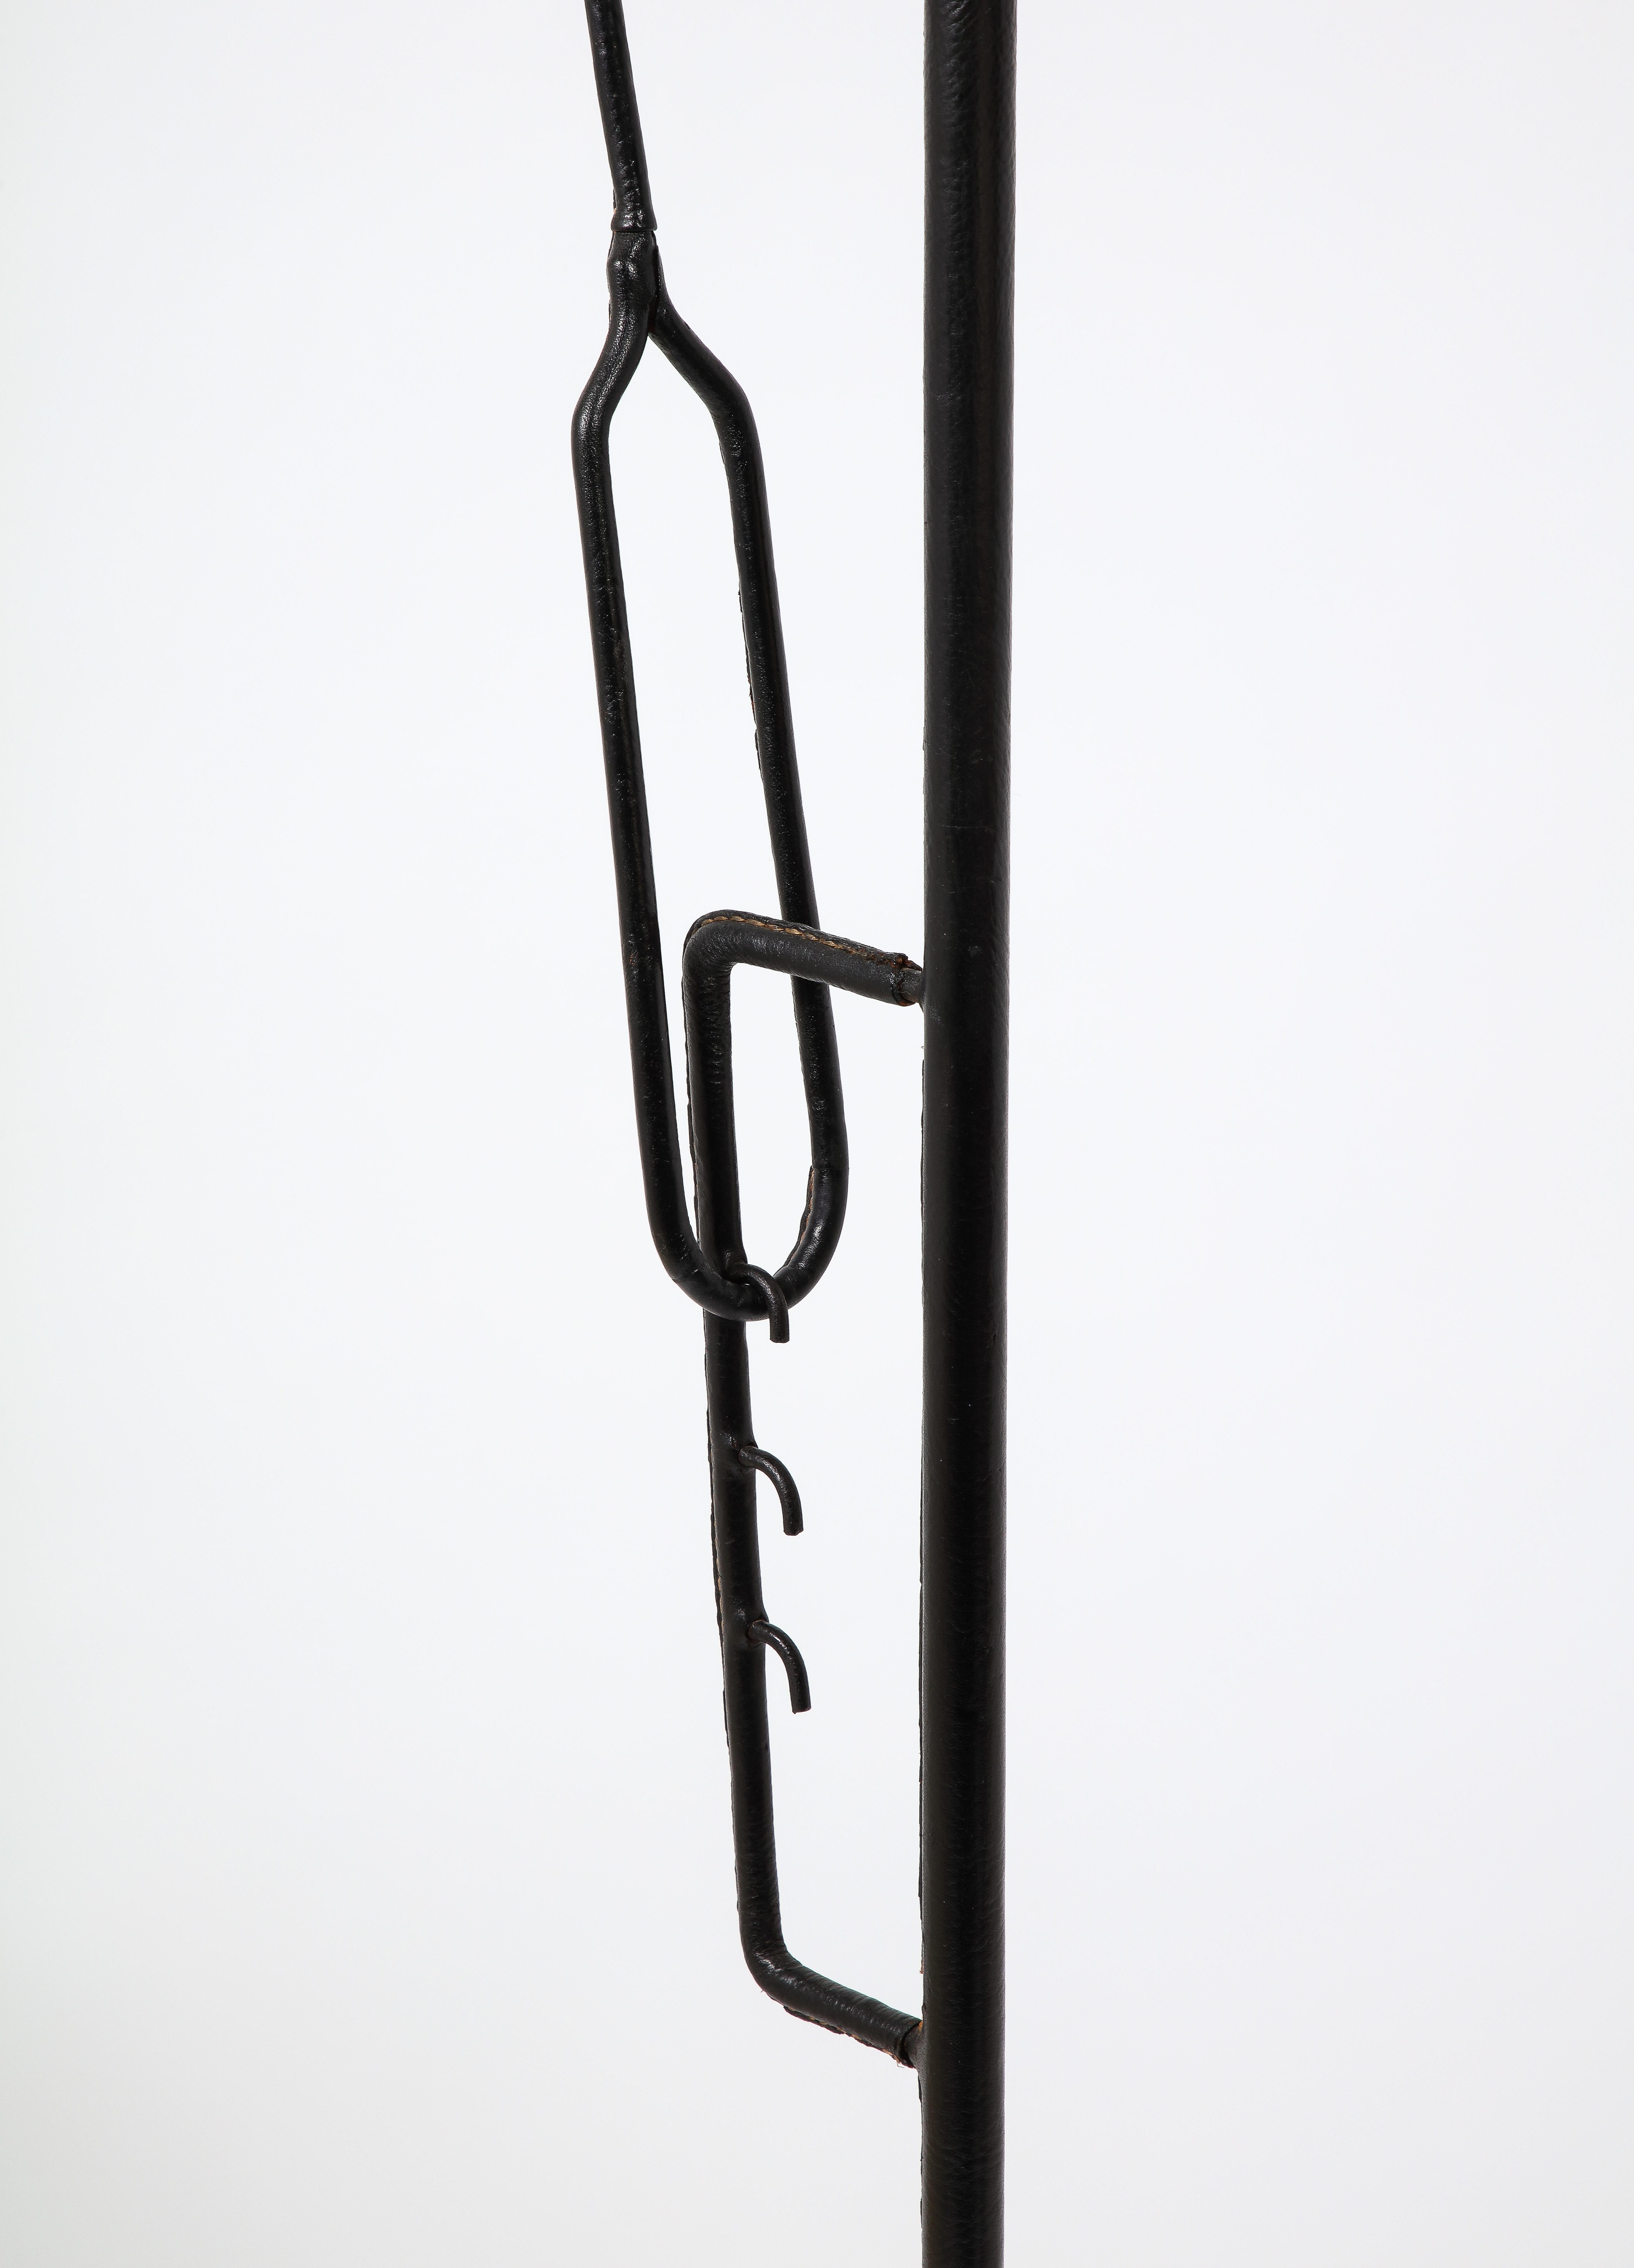 20th Century Jacques Adnet Black Leather Potence Floor Lamp, France 1940's For Sale